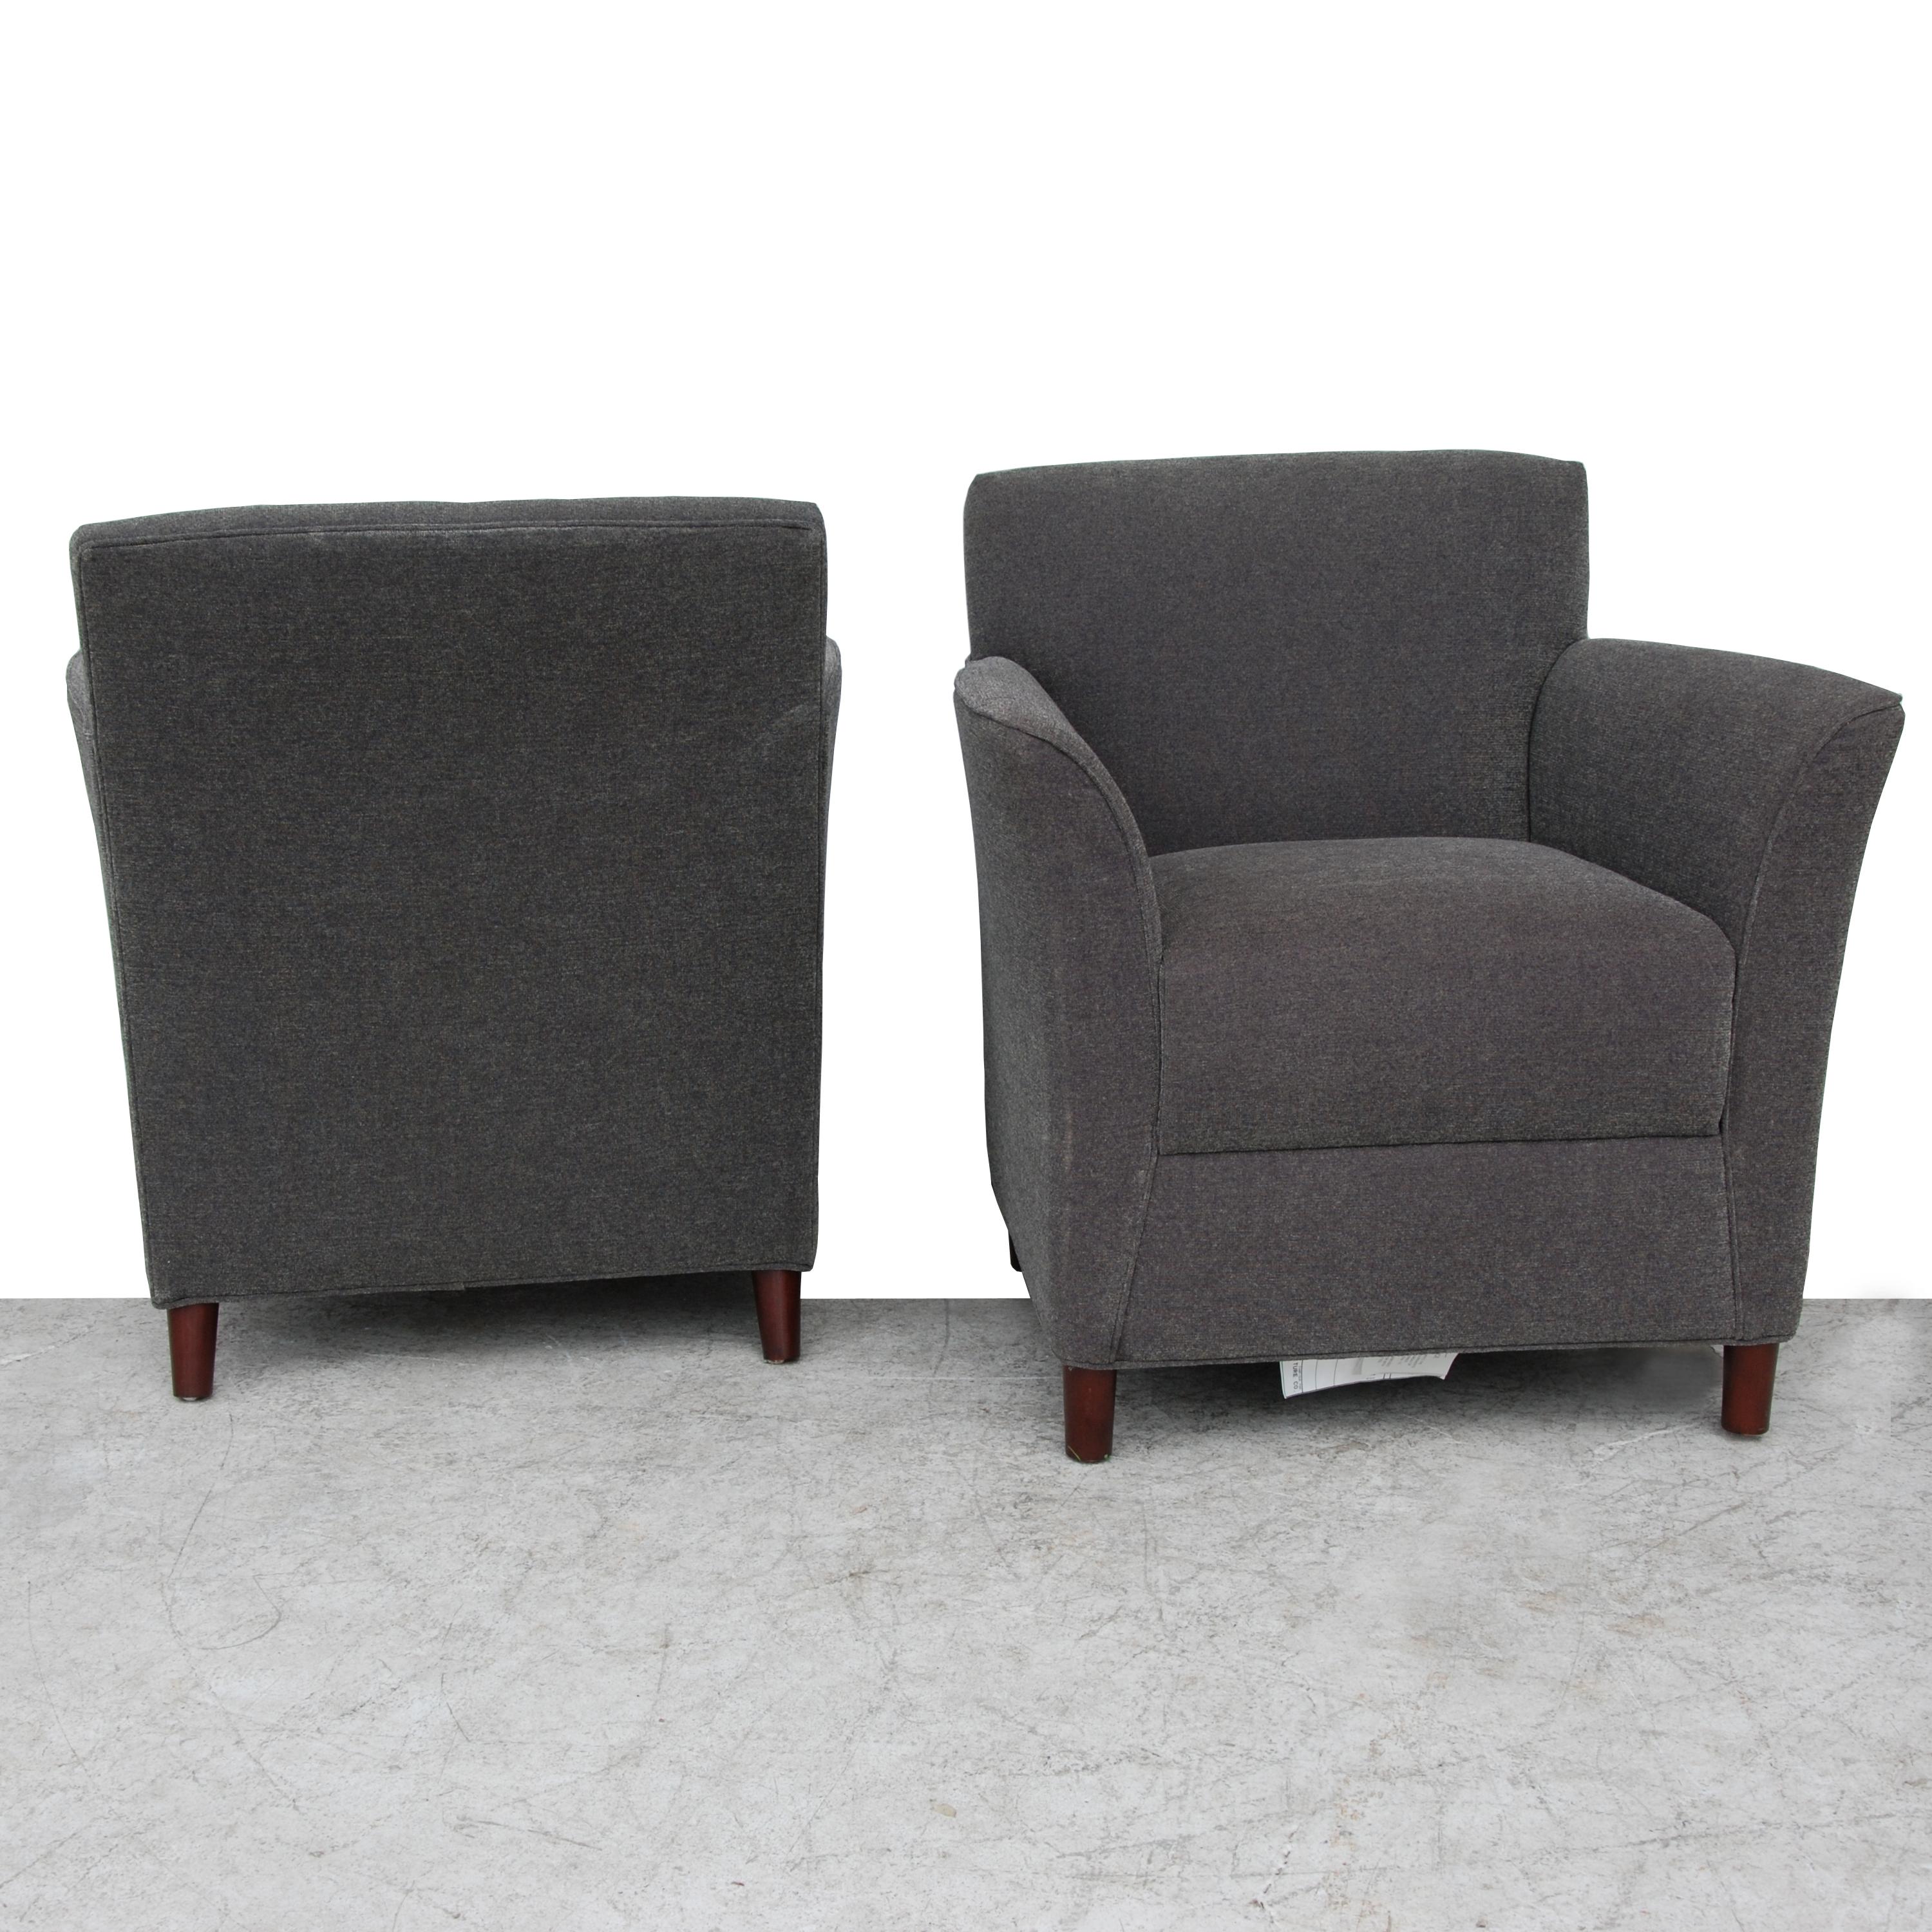 Pair of Moleskin lounge chairs by Bernhardt Furniture
 
Warm grey with gently sloping arms.

Measures: 31.25